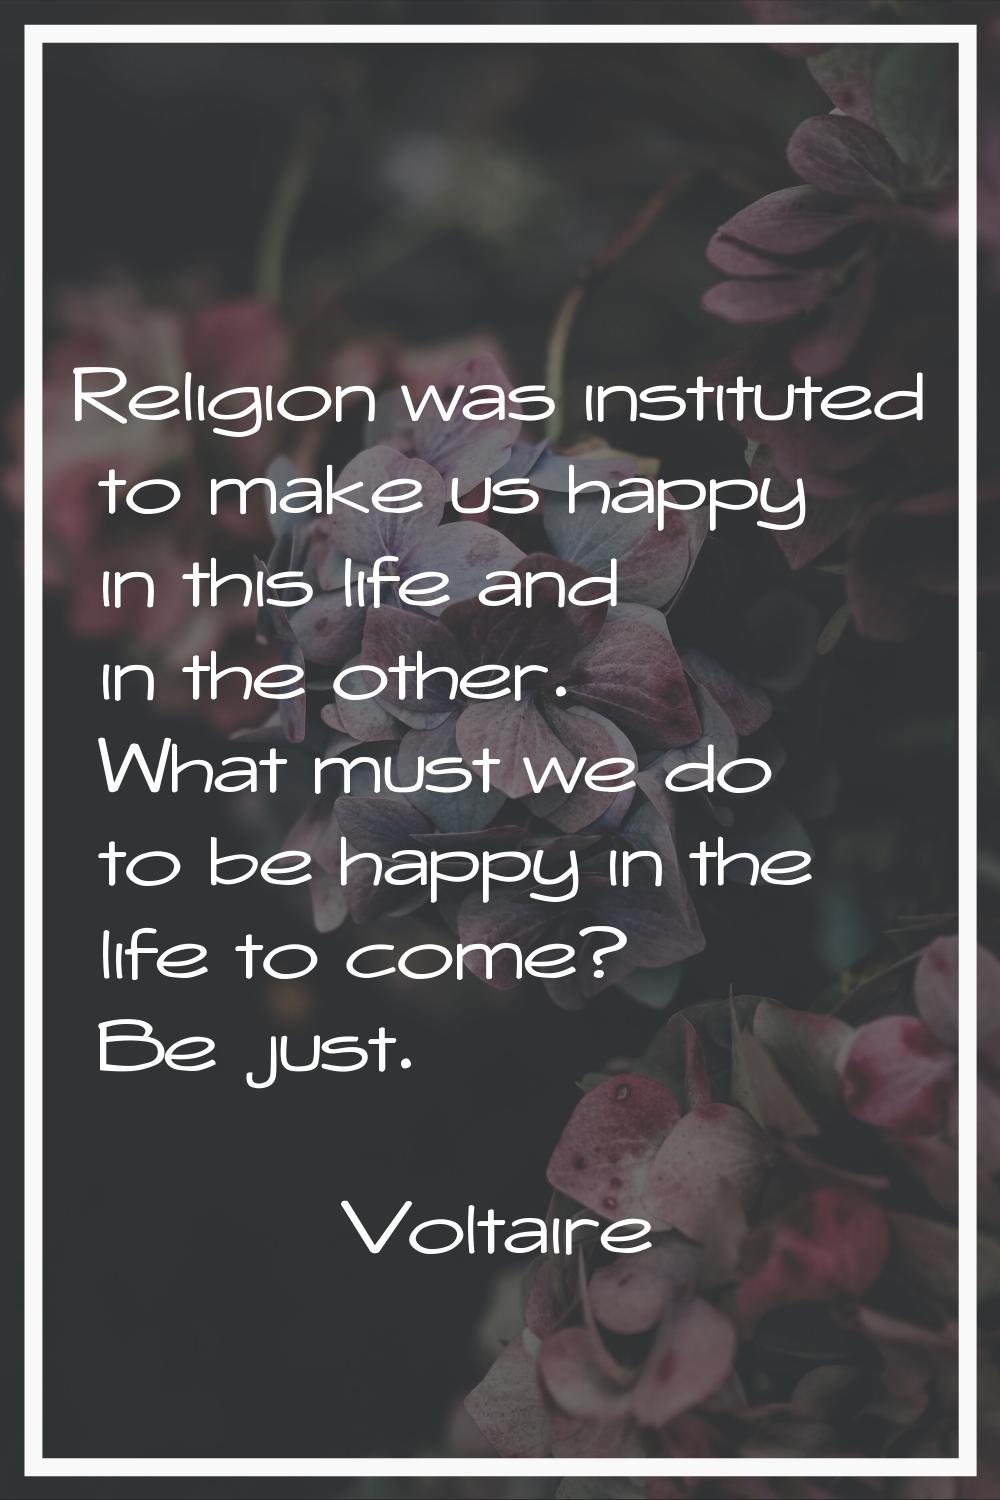 Religion was instituted to make us happy in this life and in the other. What must we do to be happy